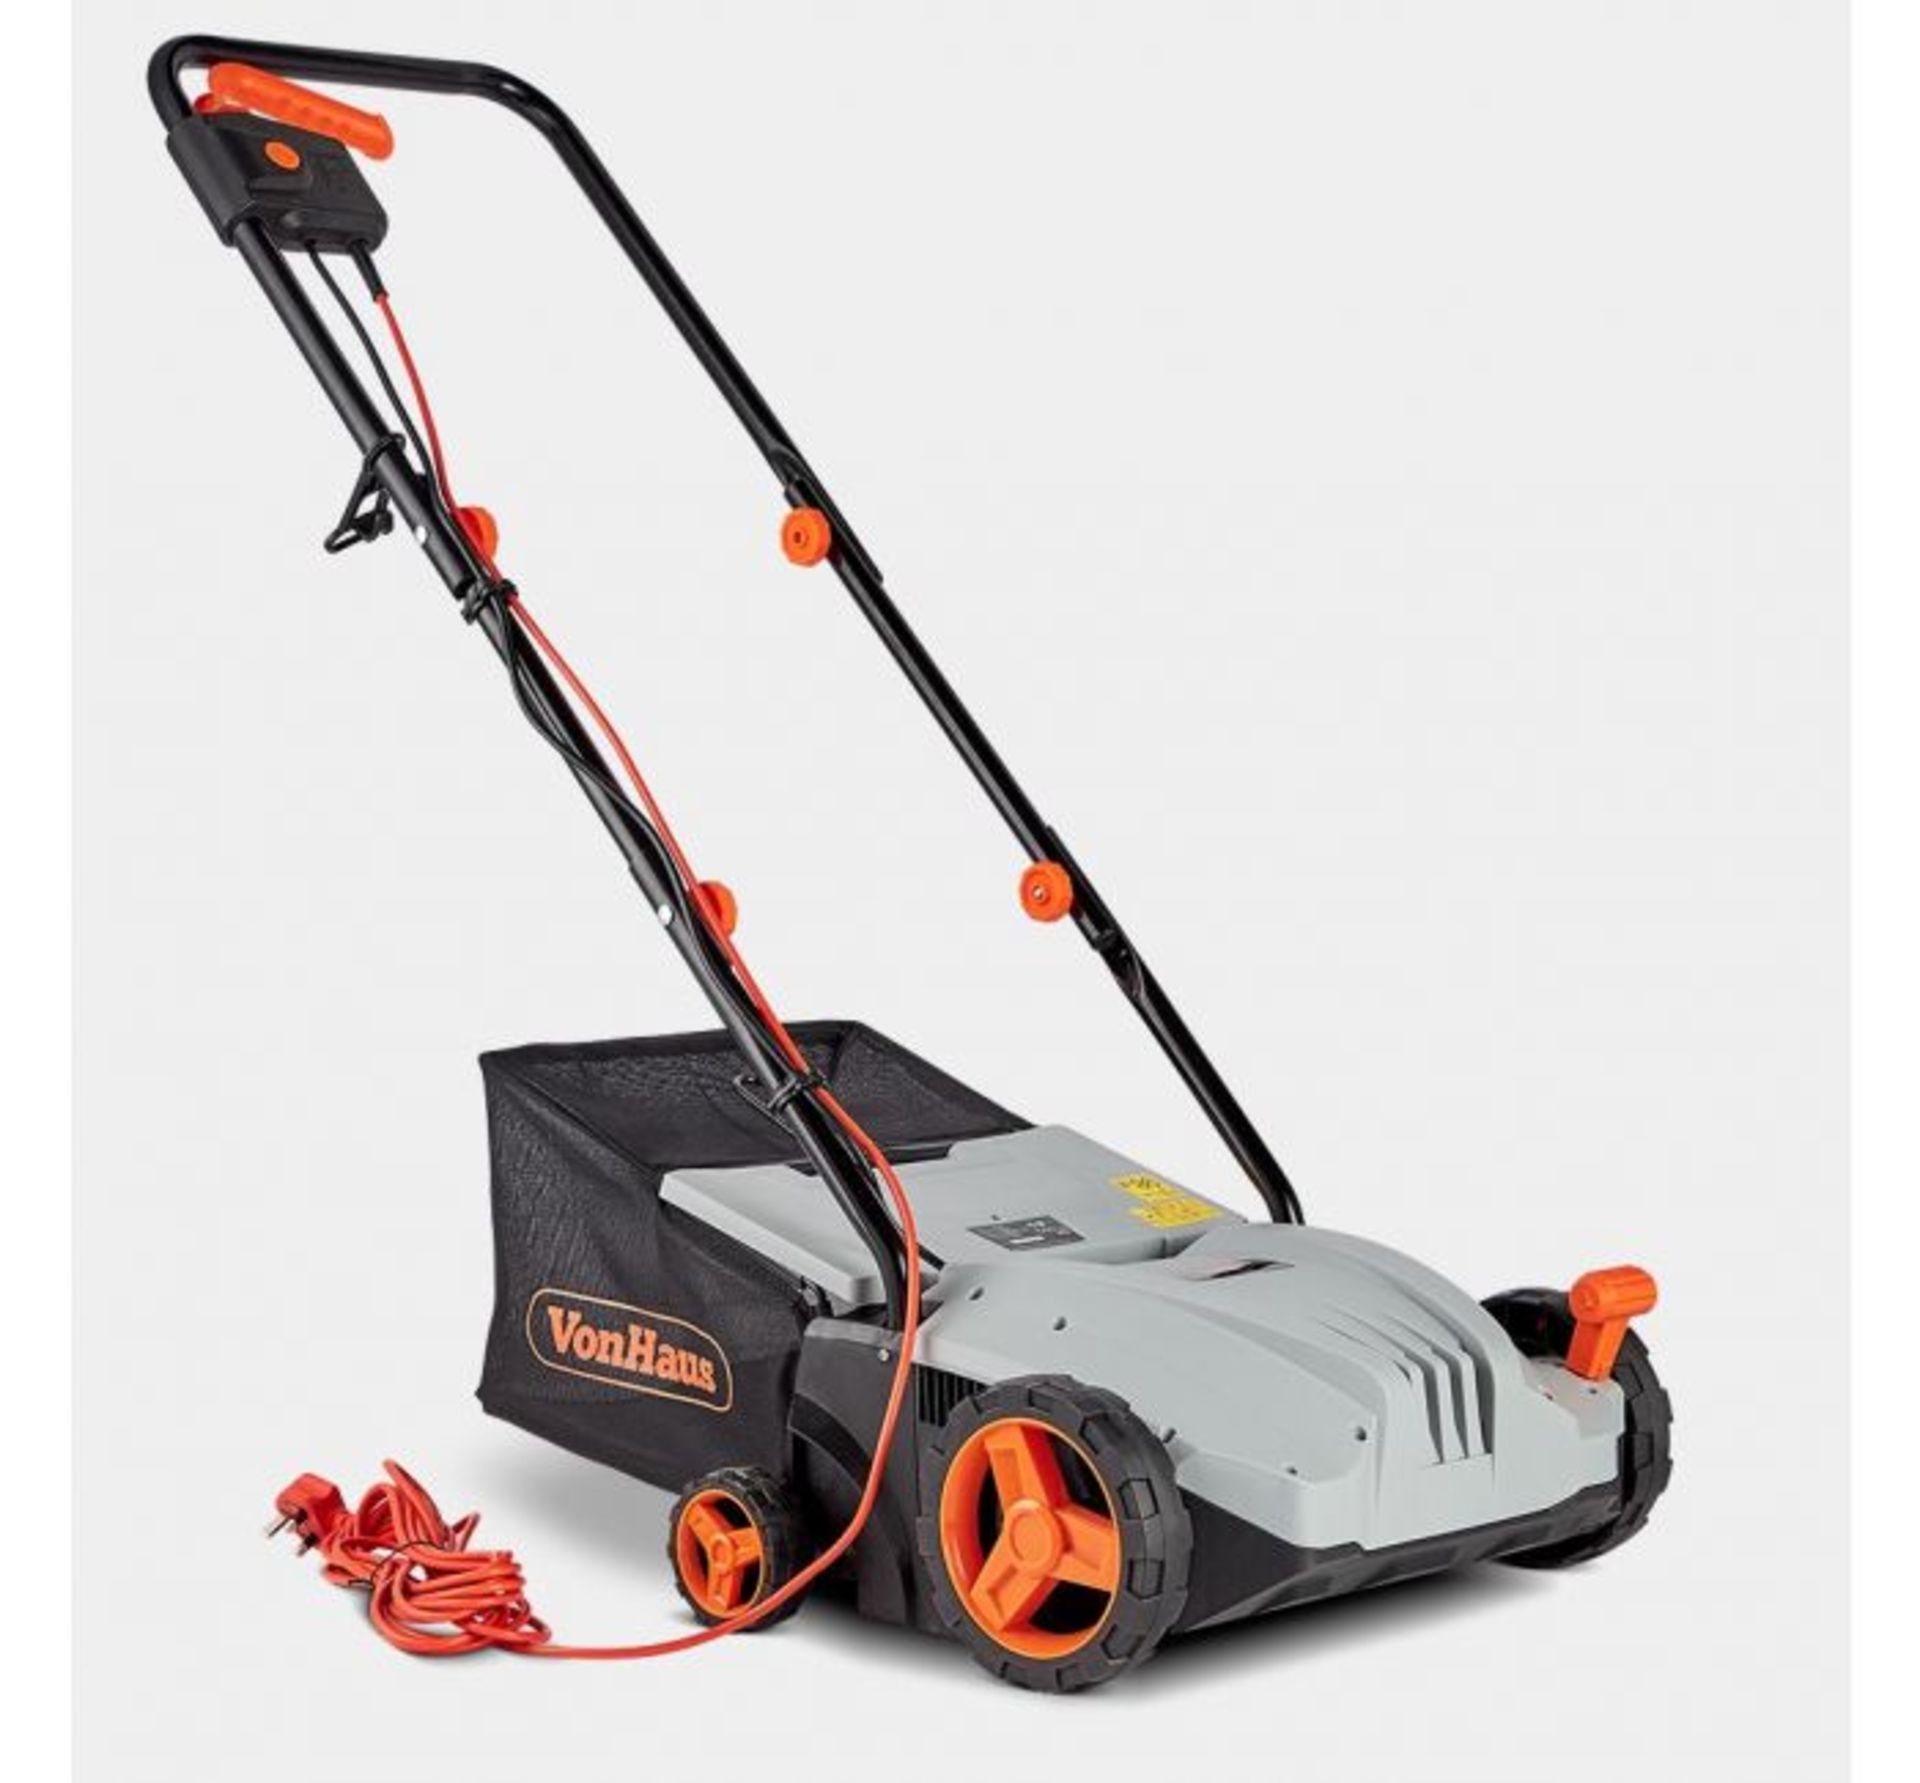 (HZ119) 1300W Lawn Rake Working width of 32cm is ideal for clearing small to mid-size lawns qu... - Image 2 of 2